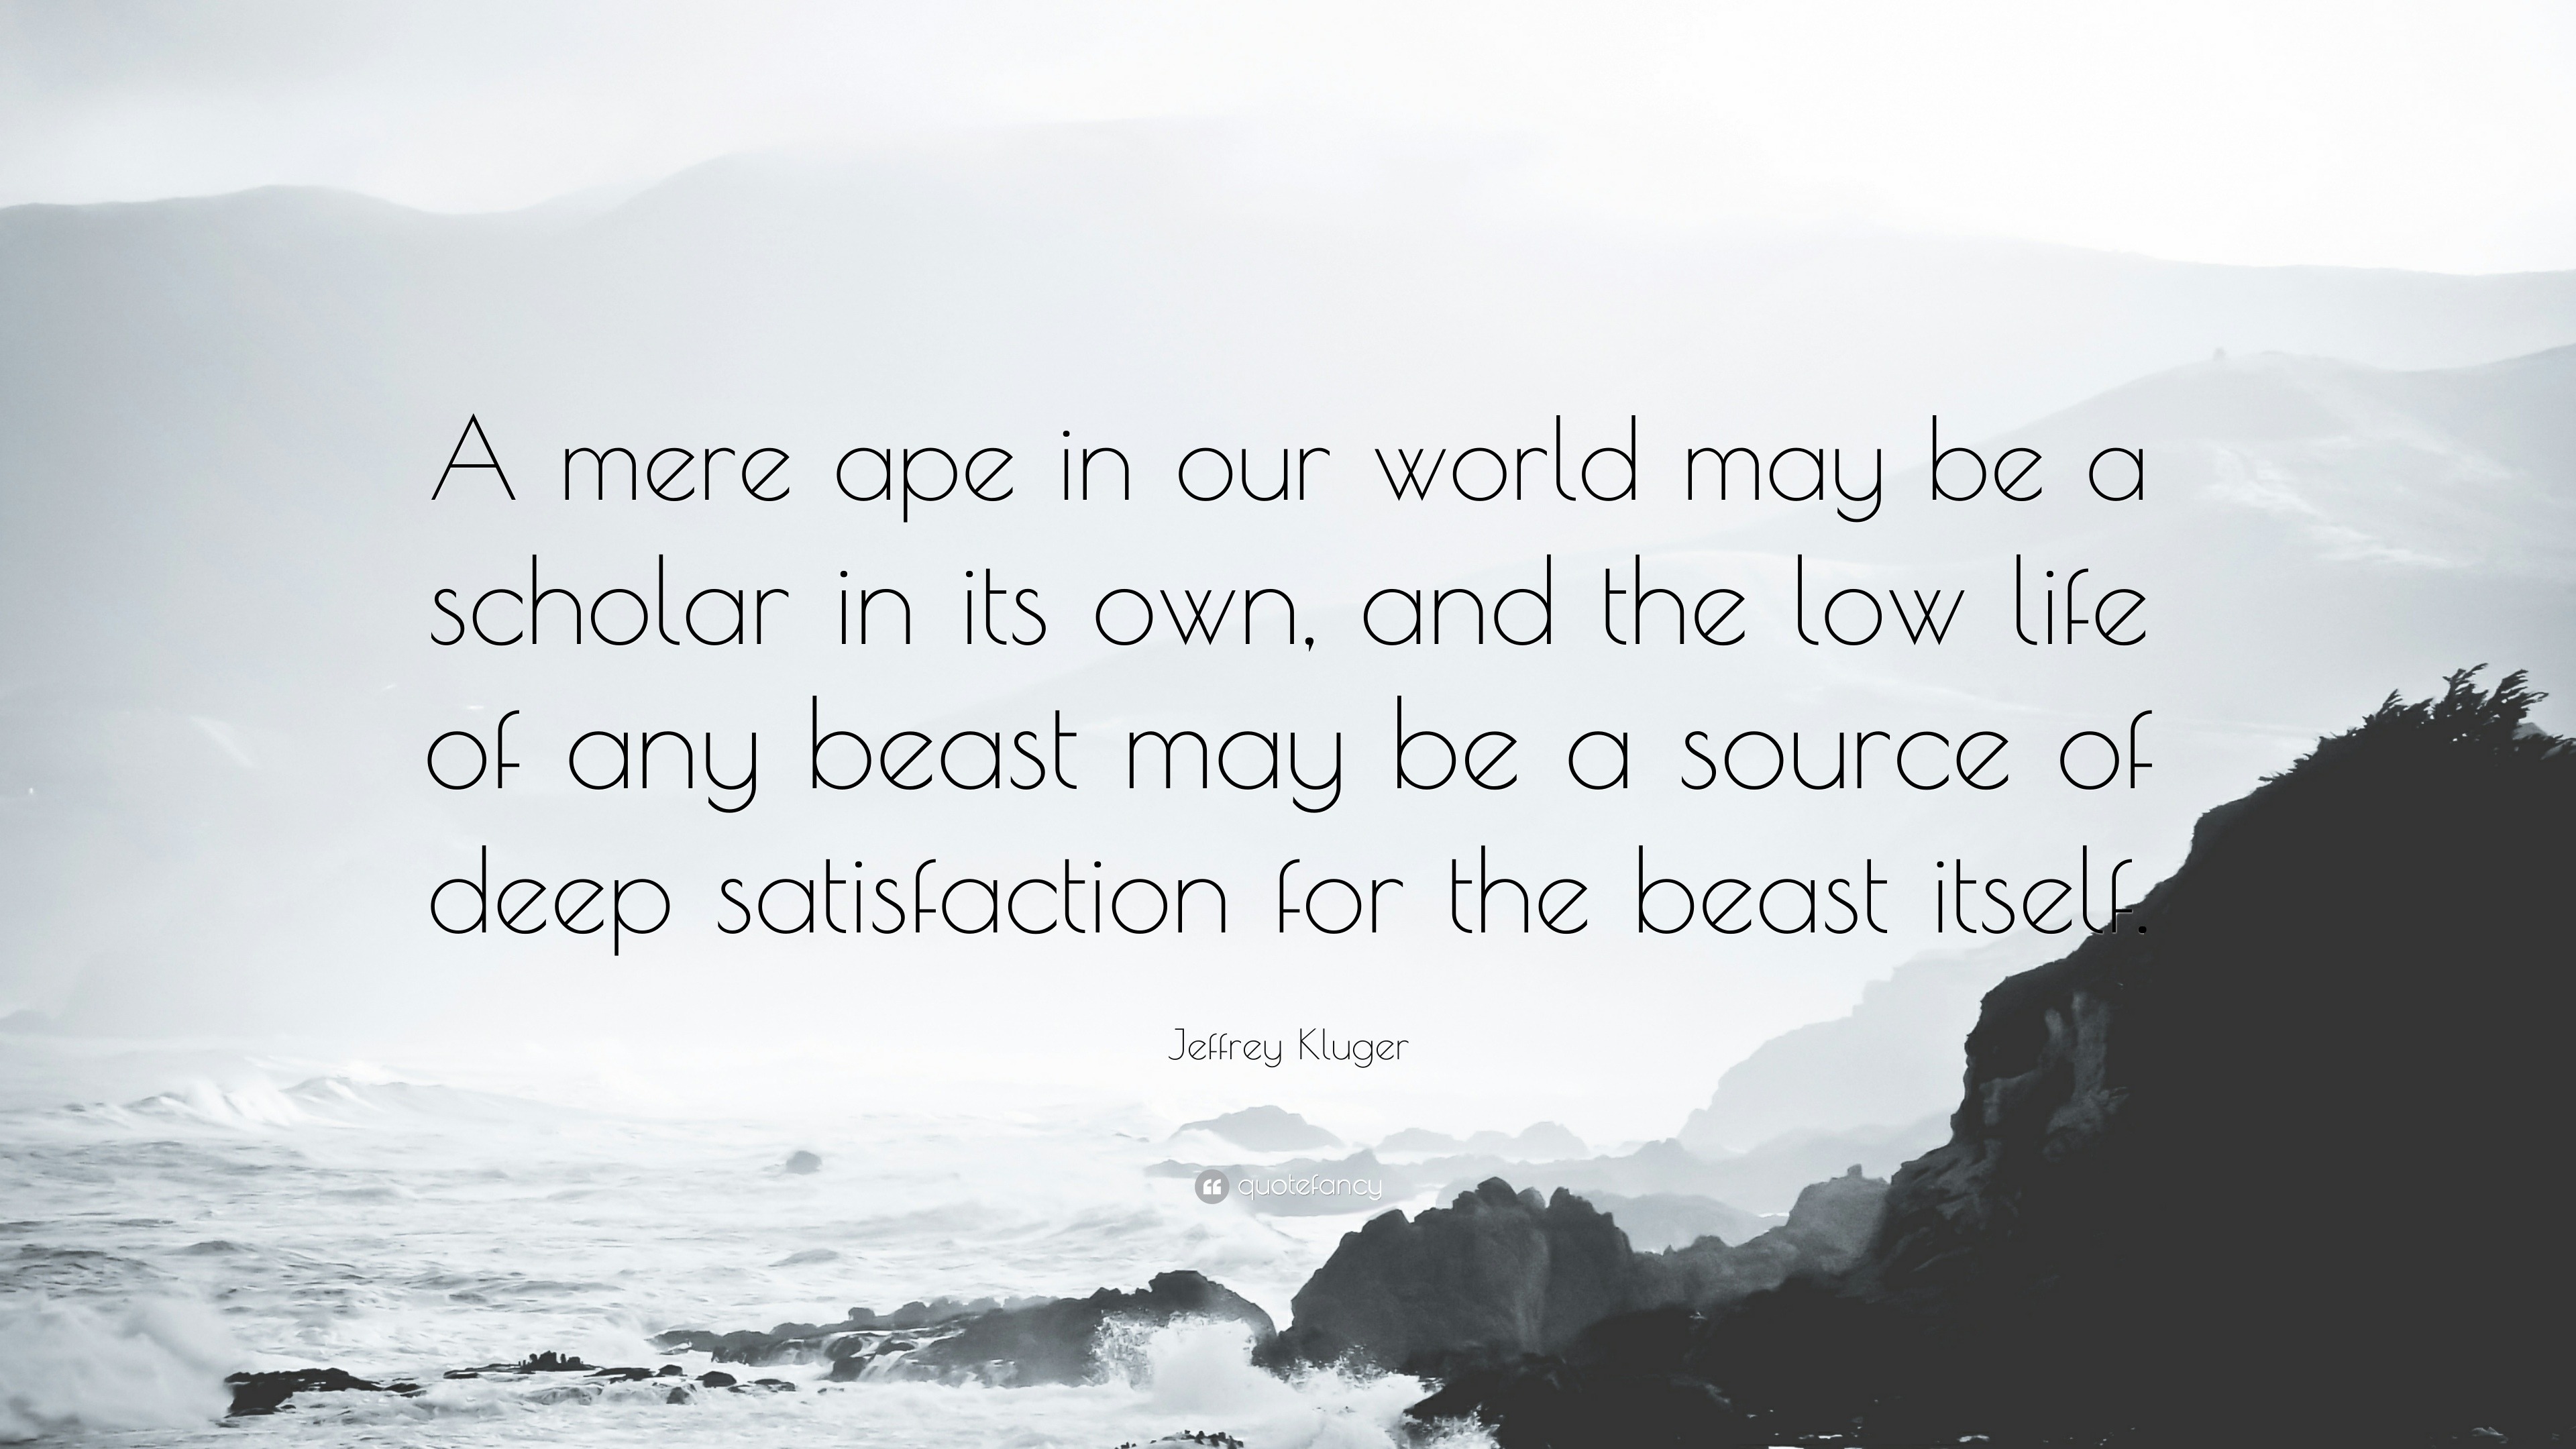 Jeffrey Kluger Quote A Mere Ape In Our World May Be A Scholar In Its Own And The Low Life Of Any Beast May Be A Source Of Deep Satisfaction